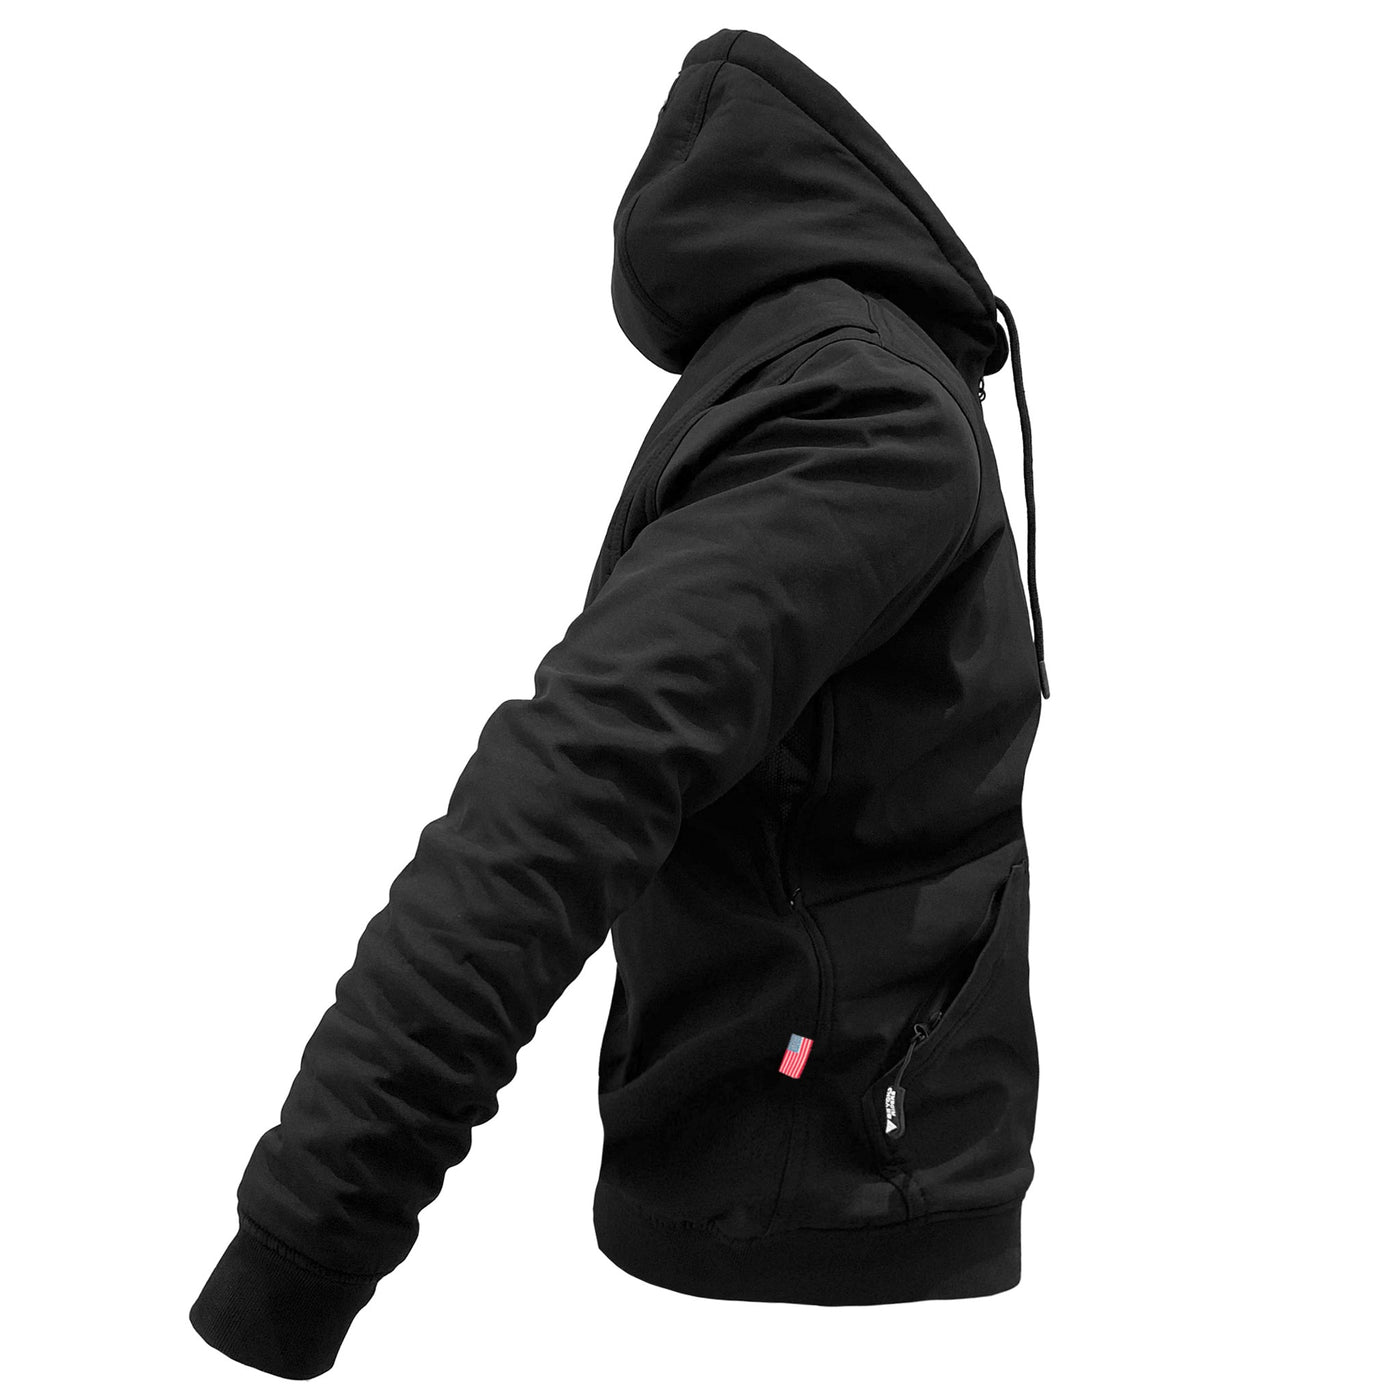 Protective SoftShell Unisex Hoodie with Pads - Black Matte